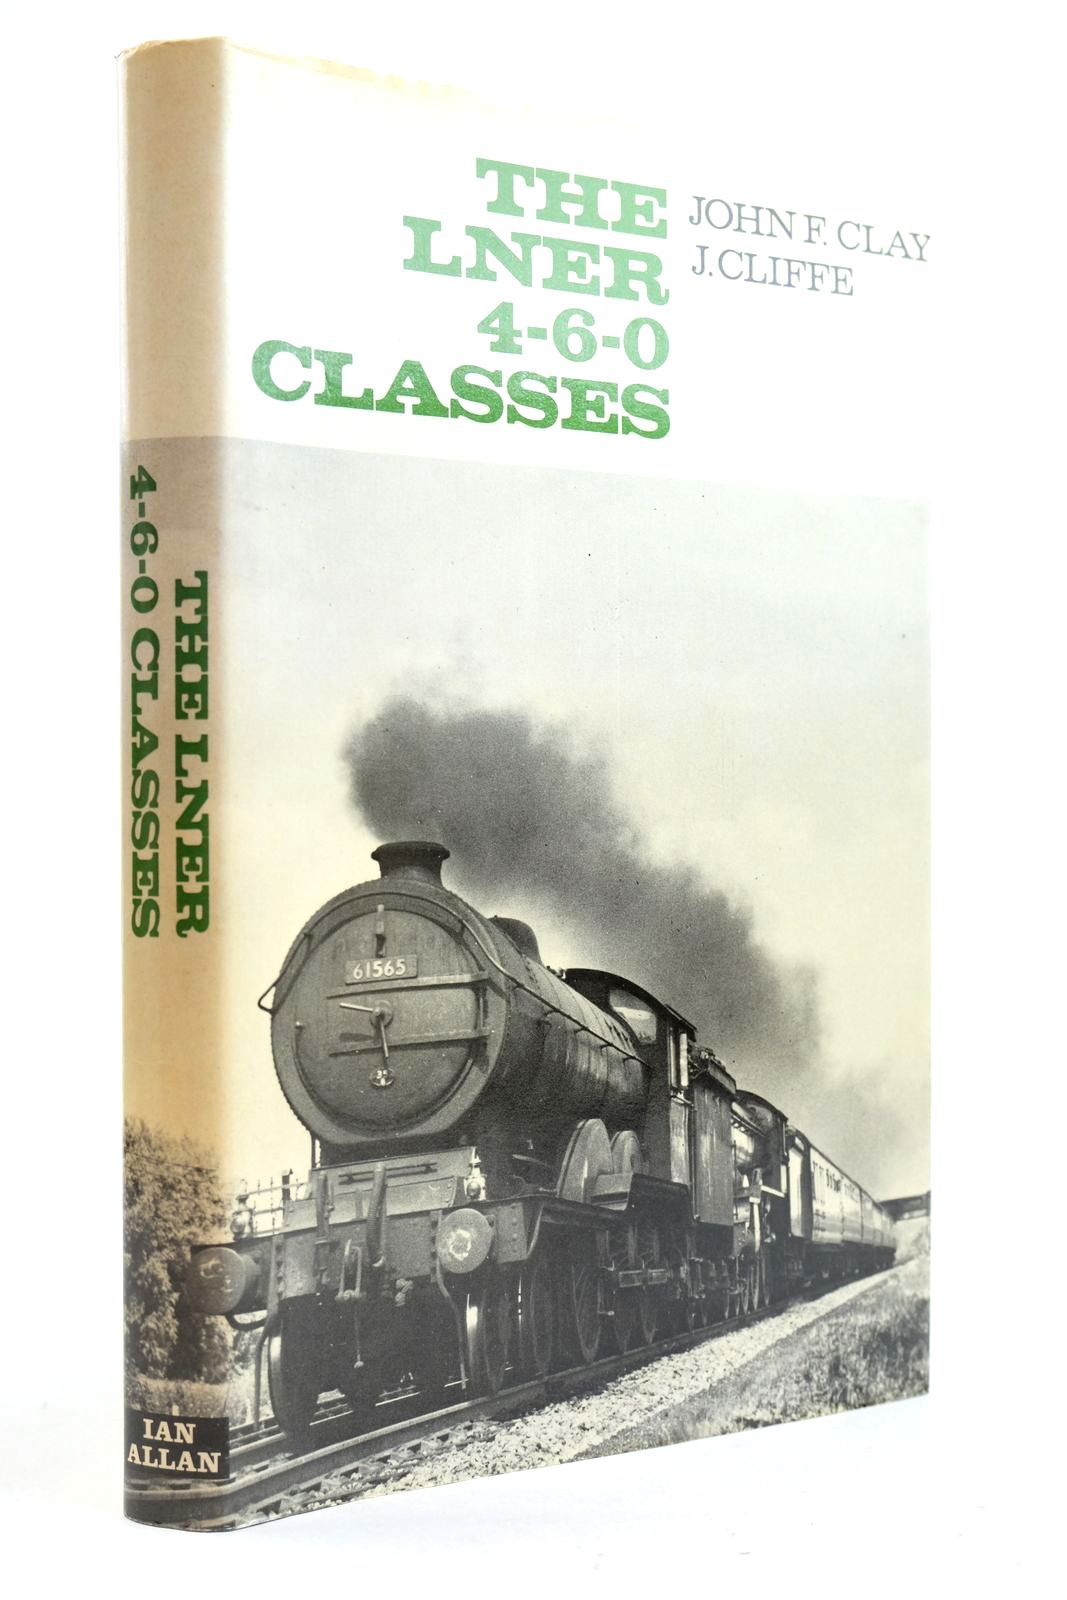 Photo of THE LNER 4-6-0 CLASSES written by Clay, John F. Cliffe, J. published by Ian Allan Ltd. (STOCK CODE: 2133002)  for sale by Stella & Rose's Books